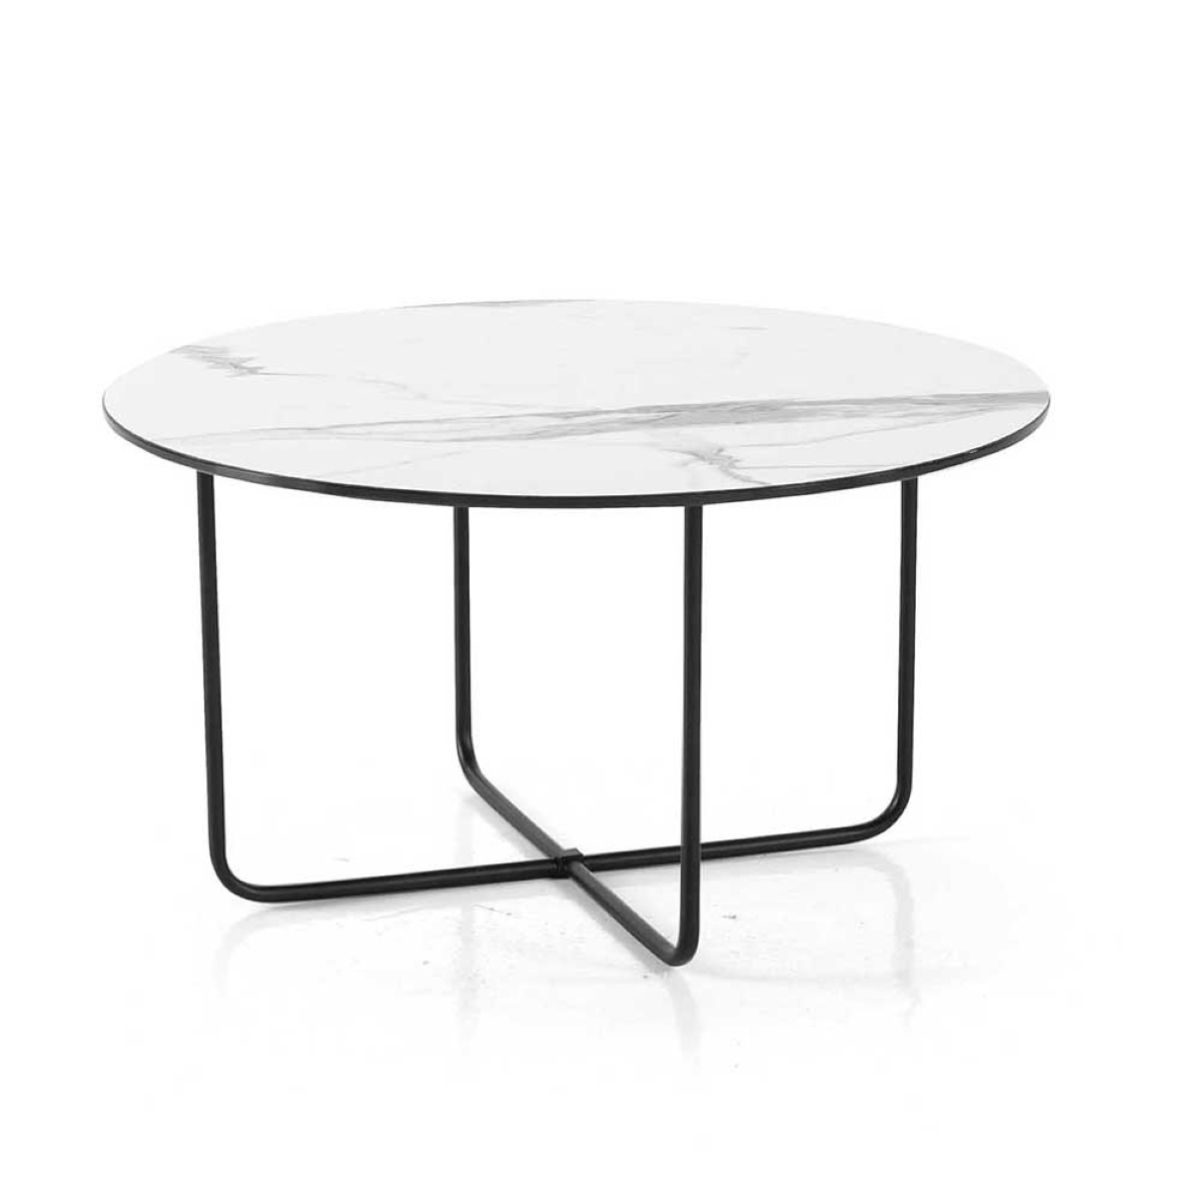 Round Coffee Table With White Marble Effect Glass Top Jon 60 Inside Most Recent Glass Top Coffee Tables (View 6 of 20)